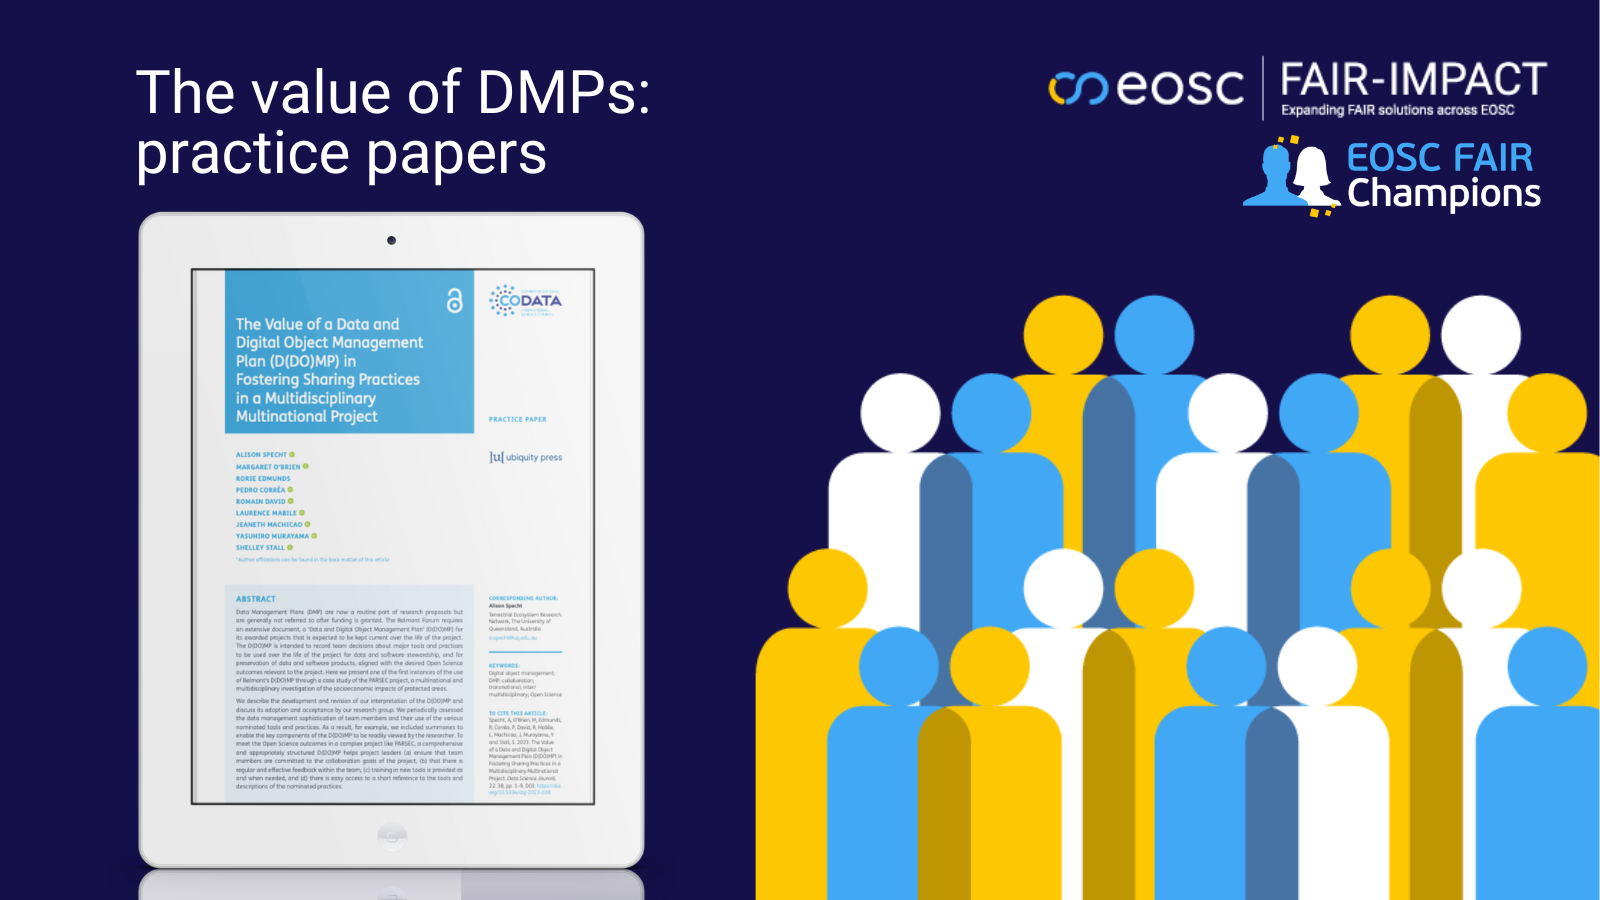 Two practice papers on DMPs published by the Data Science Journal - banner